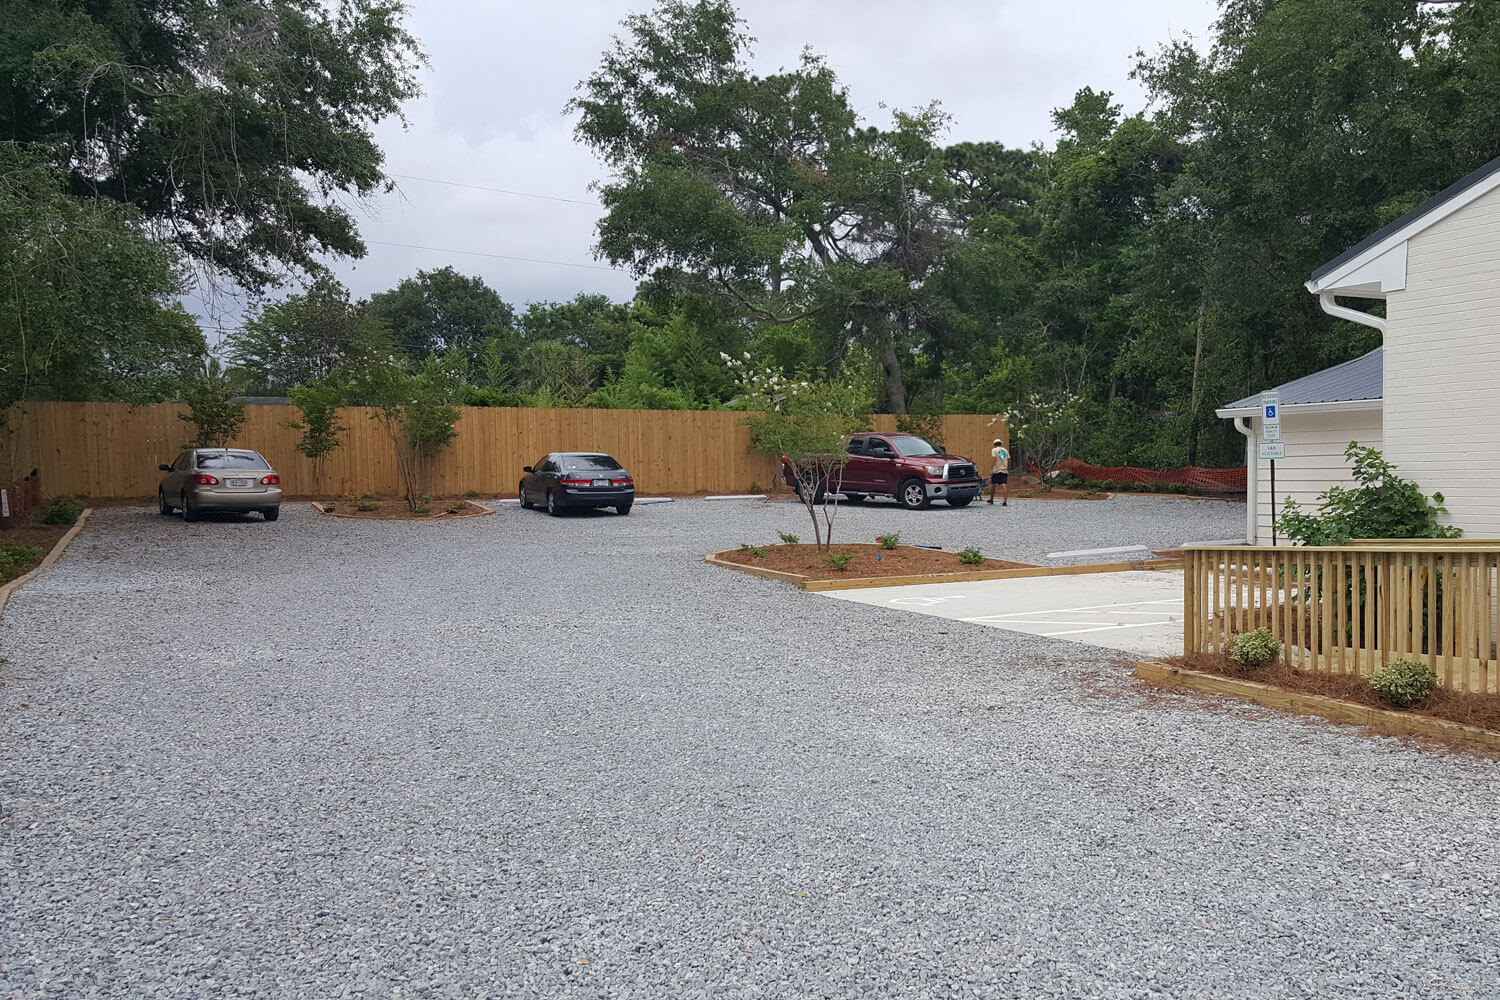 Finished gravel driveway with parking spots.